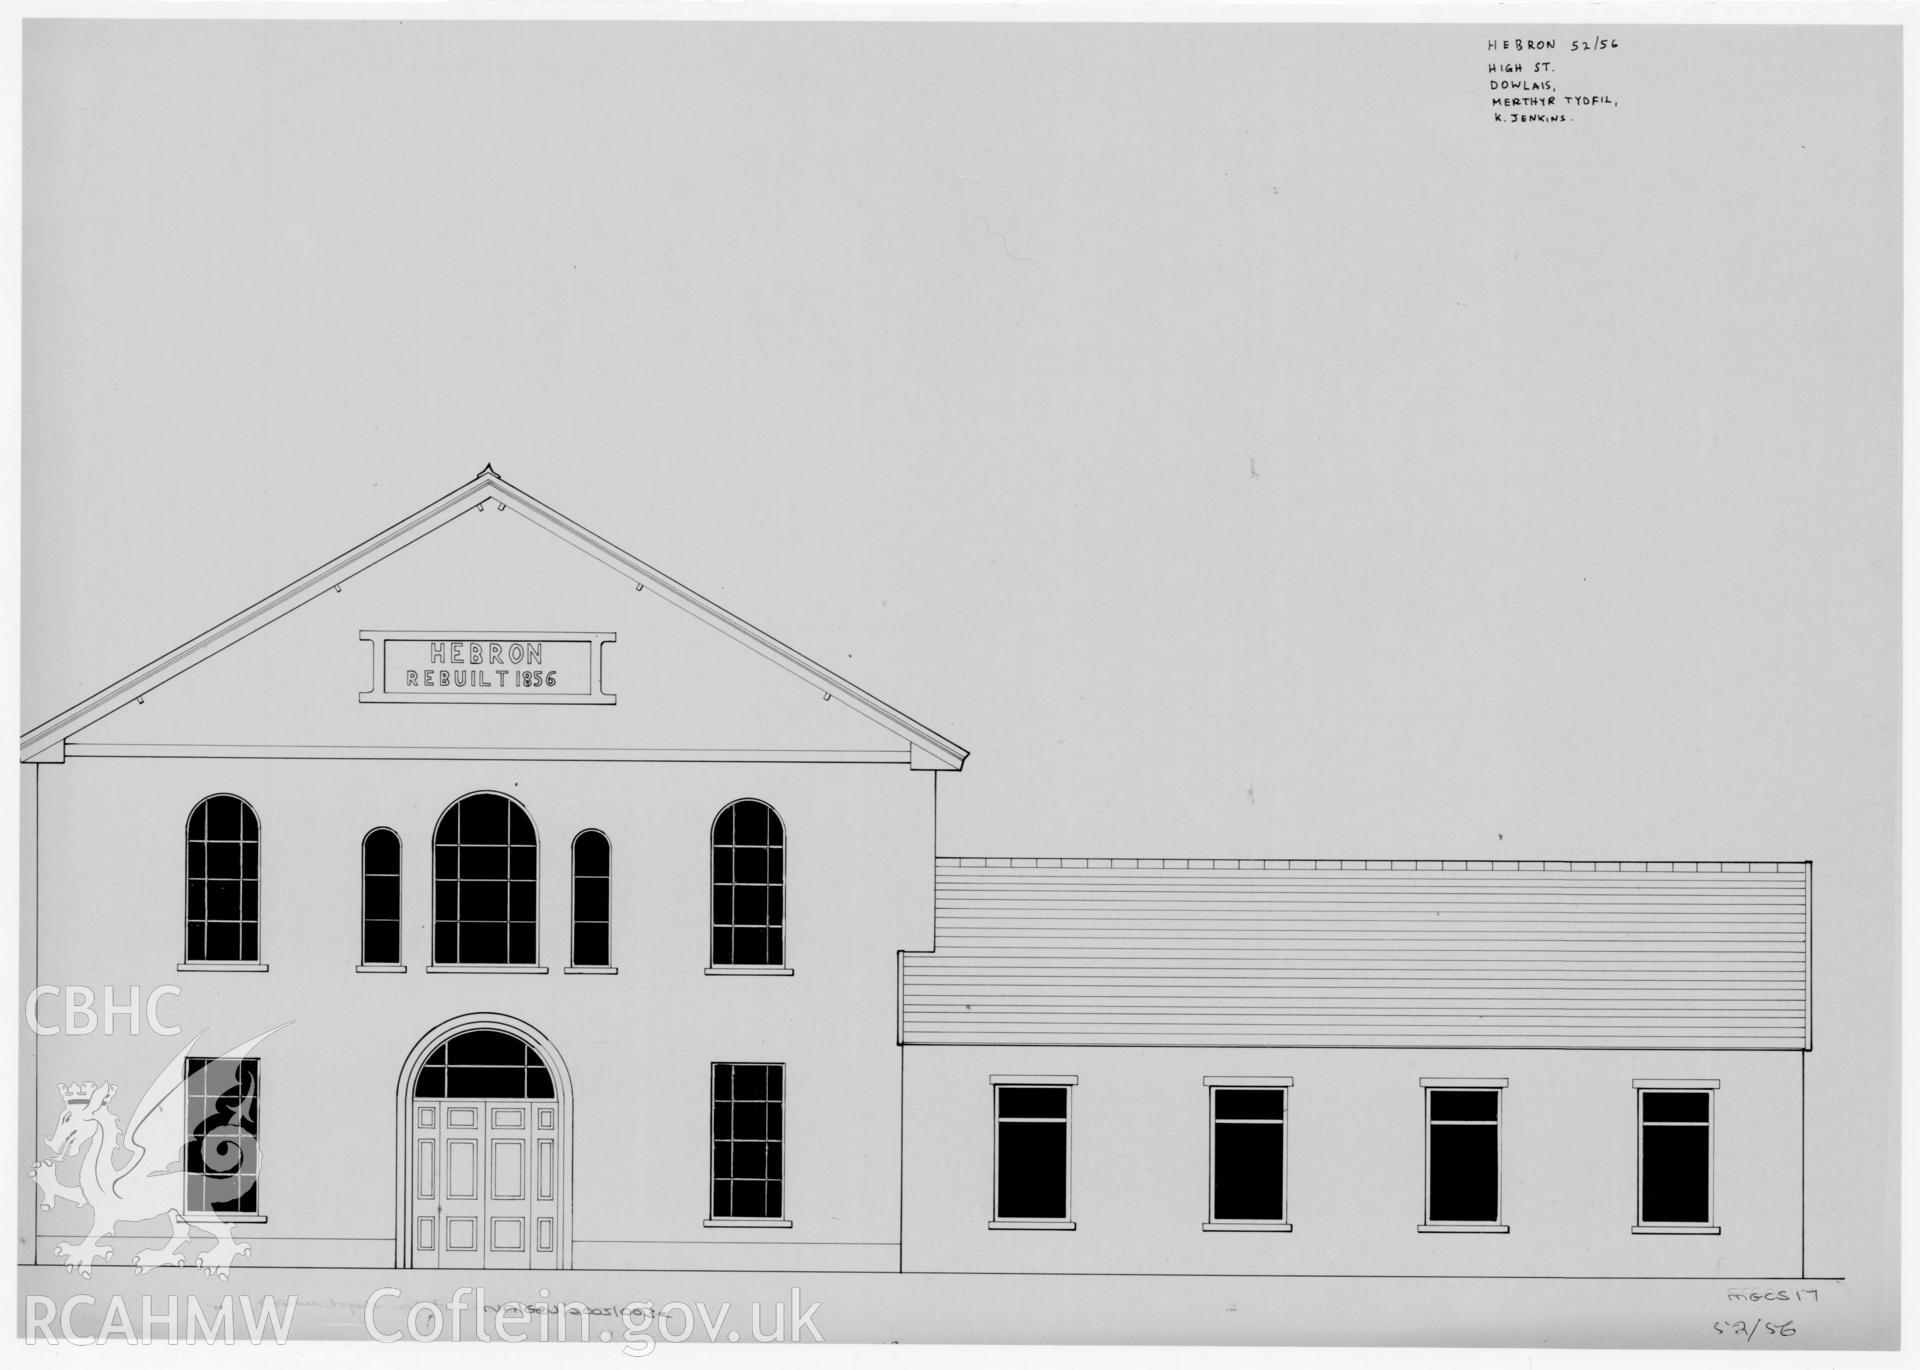 Measured drawings of Hebron Chapel, High Street, Dowlais, Merthyr Tydfil: front elevation and floor plan. Drawn by K. Jenkins.